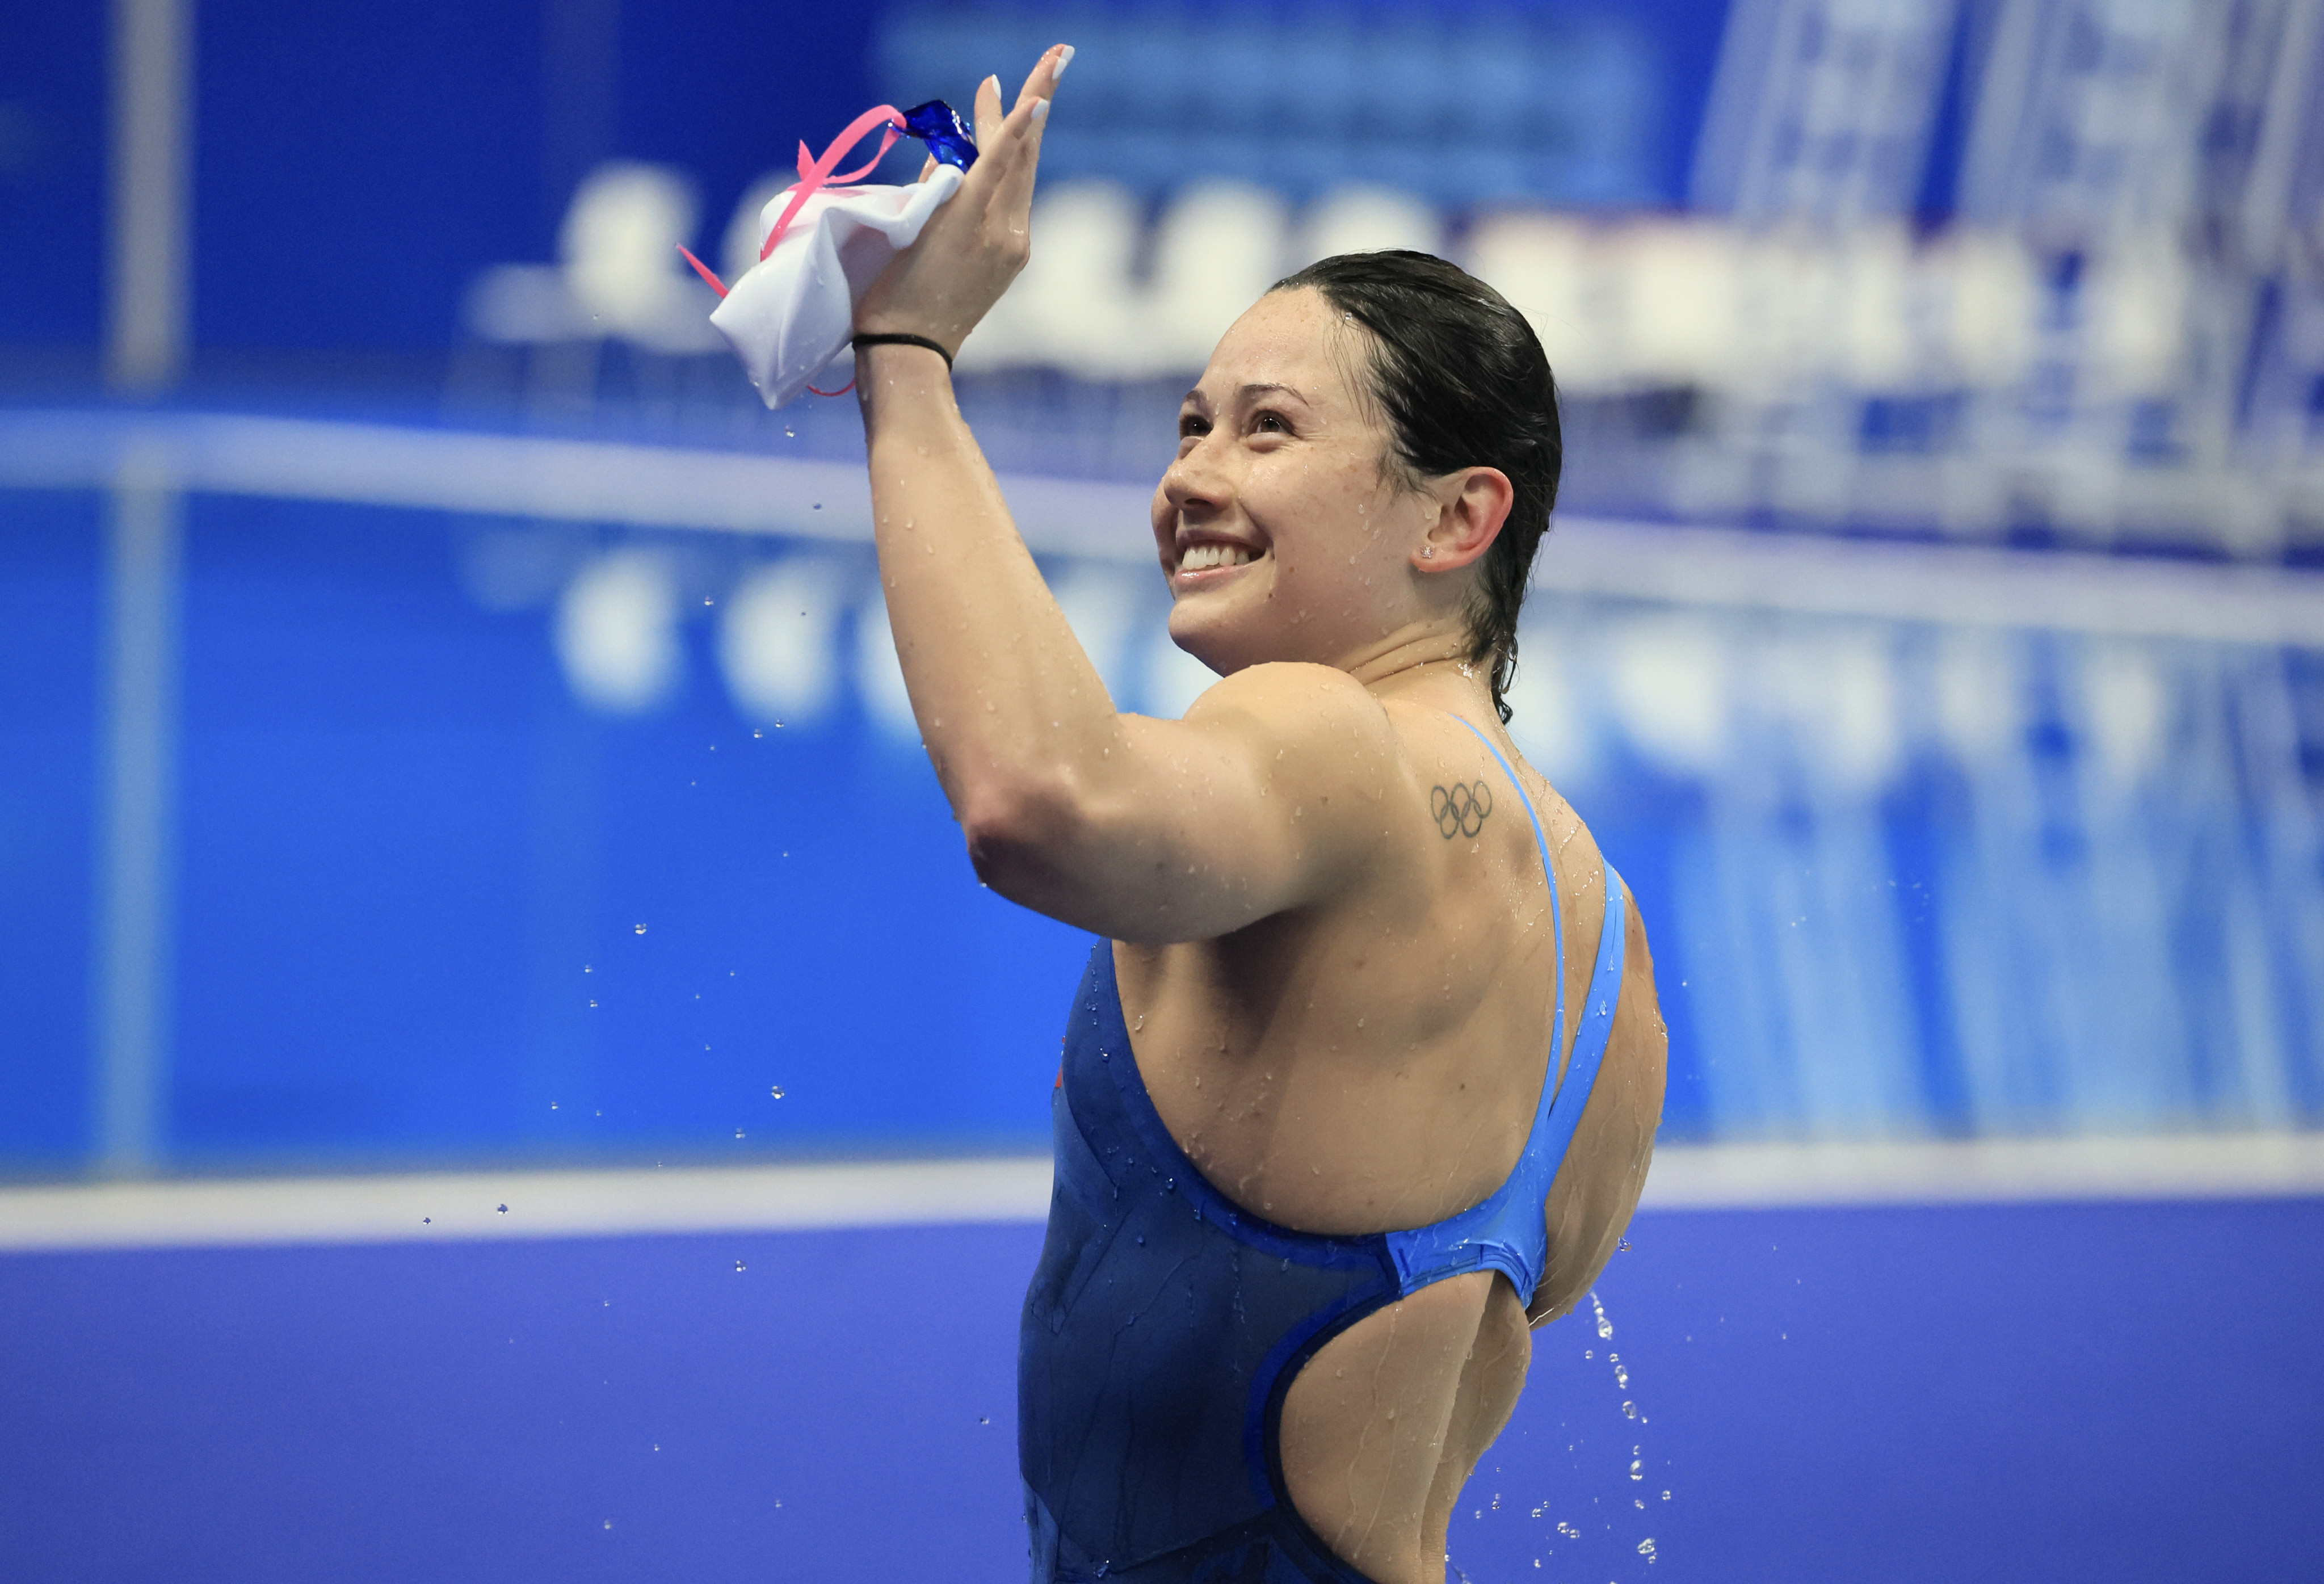 Siobhan Haughey waves to her parents after winning the 200m freestyle at the Asian Games. Photo: Dickson Lee